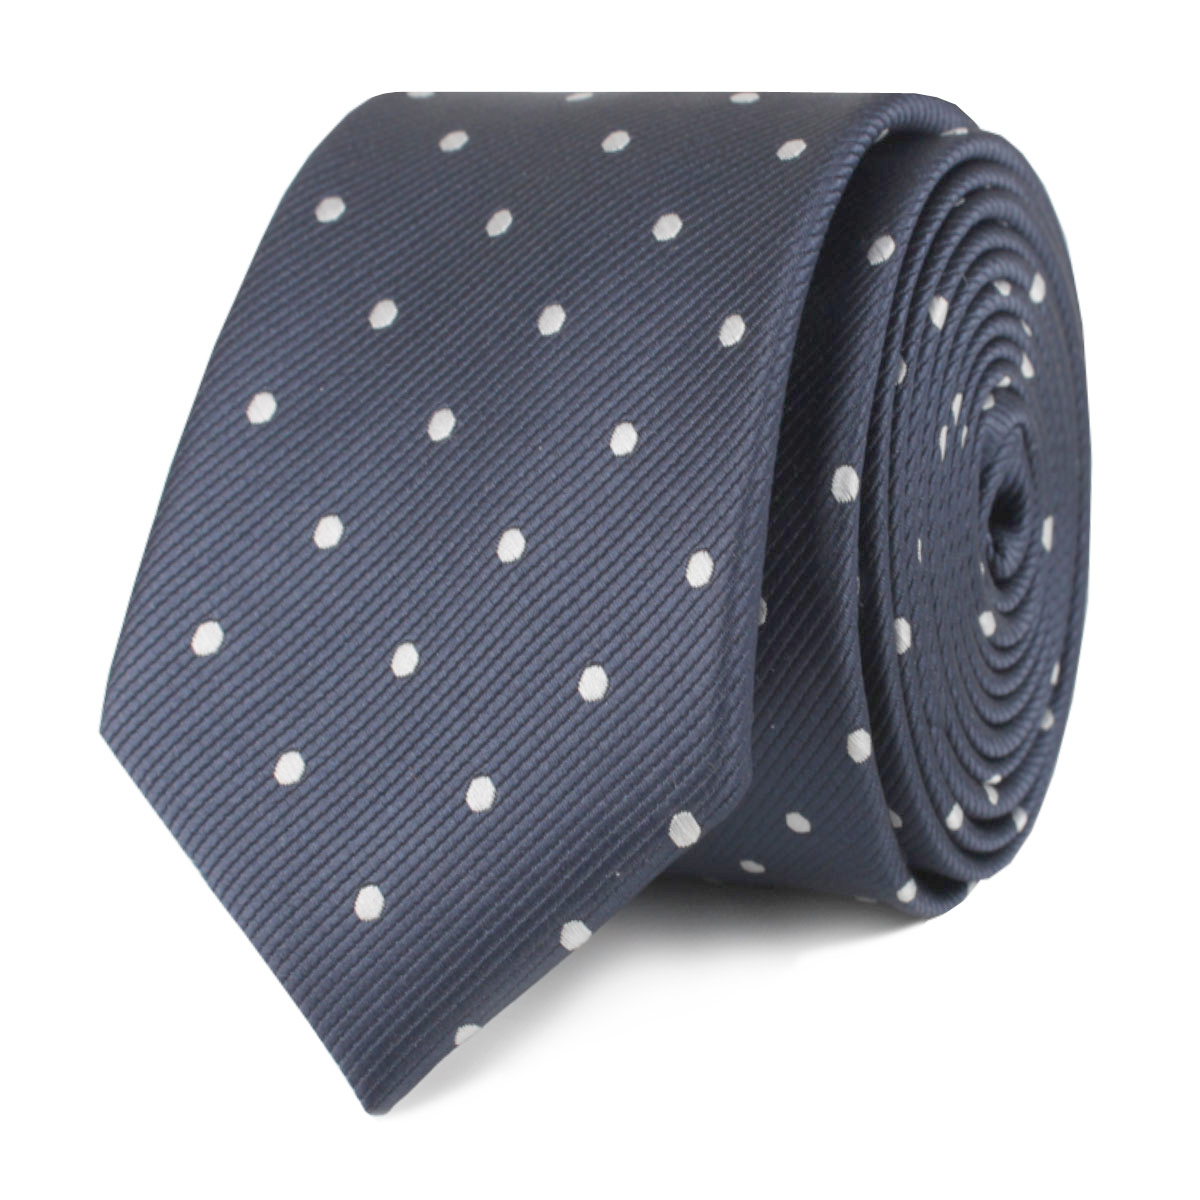 The OTAA Navy Blue with White Polka Dots Skinny Tie Front Roll